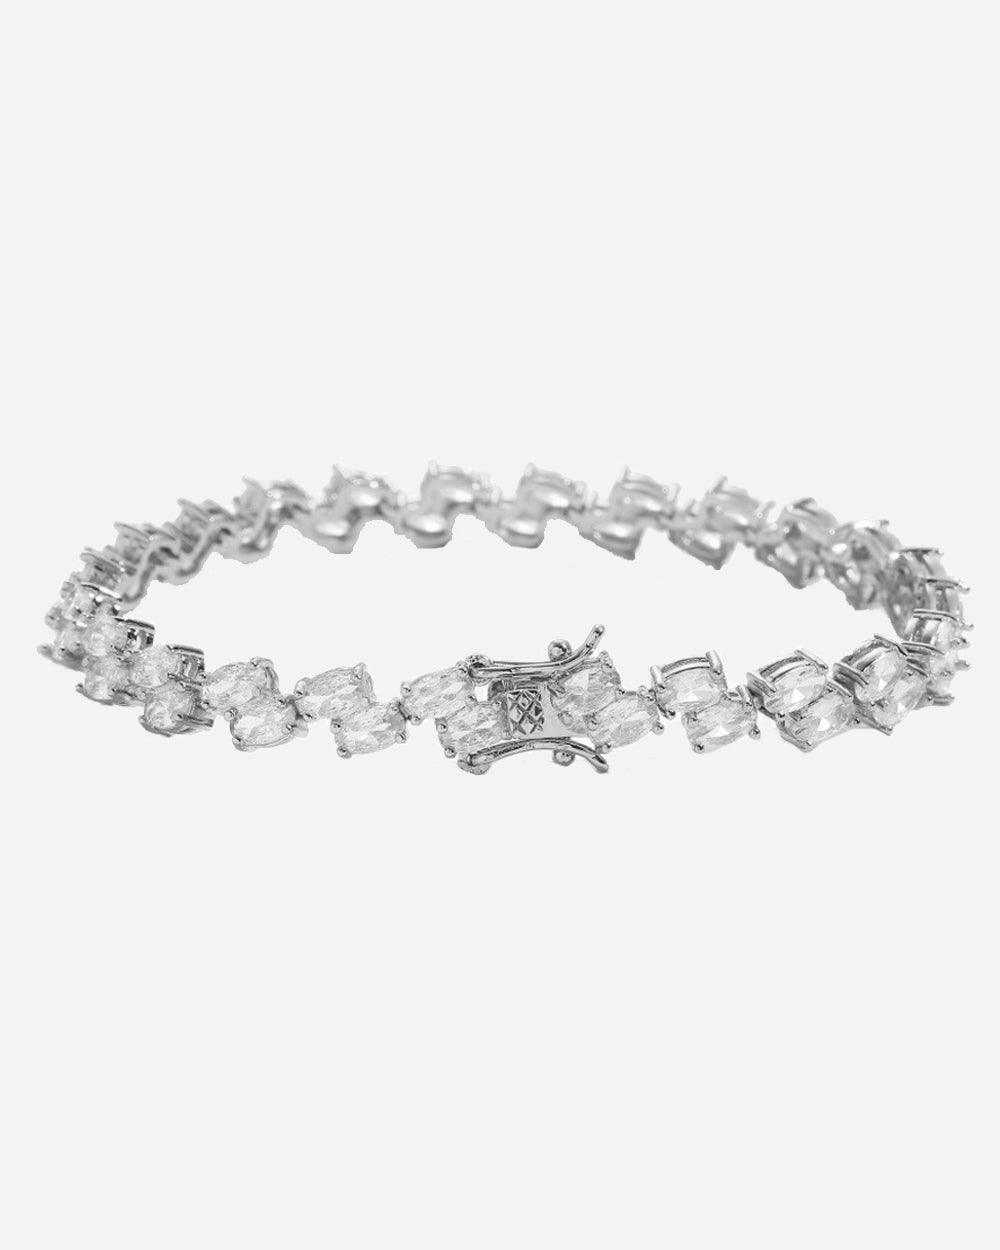 OVAL SPARKLE LINK BRACELET. - WHITE GOLD - DRIP IN THE JEWEL